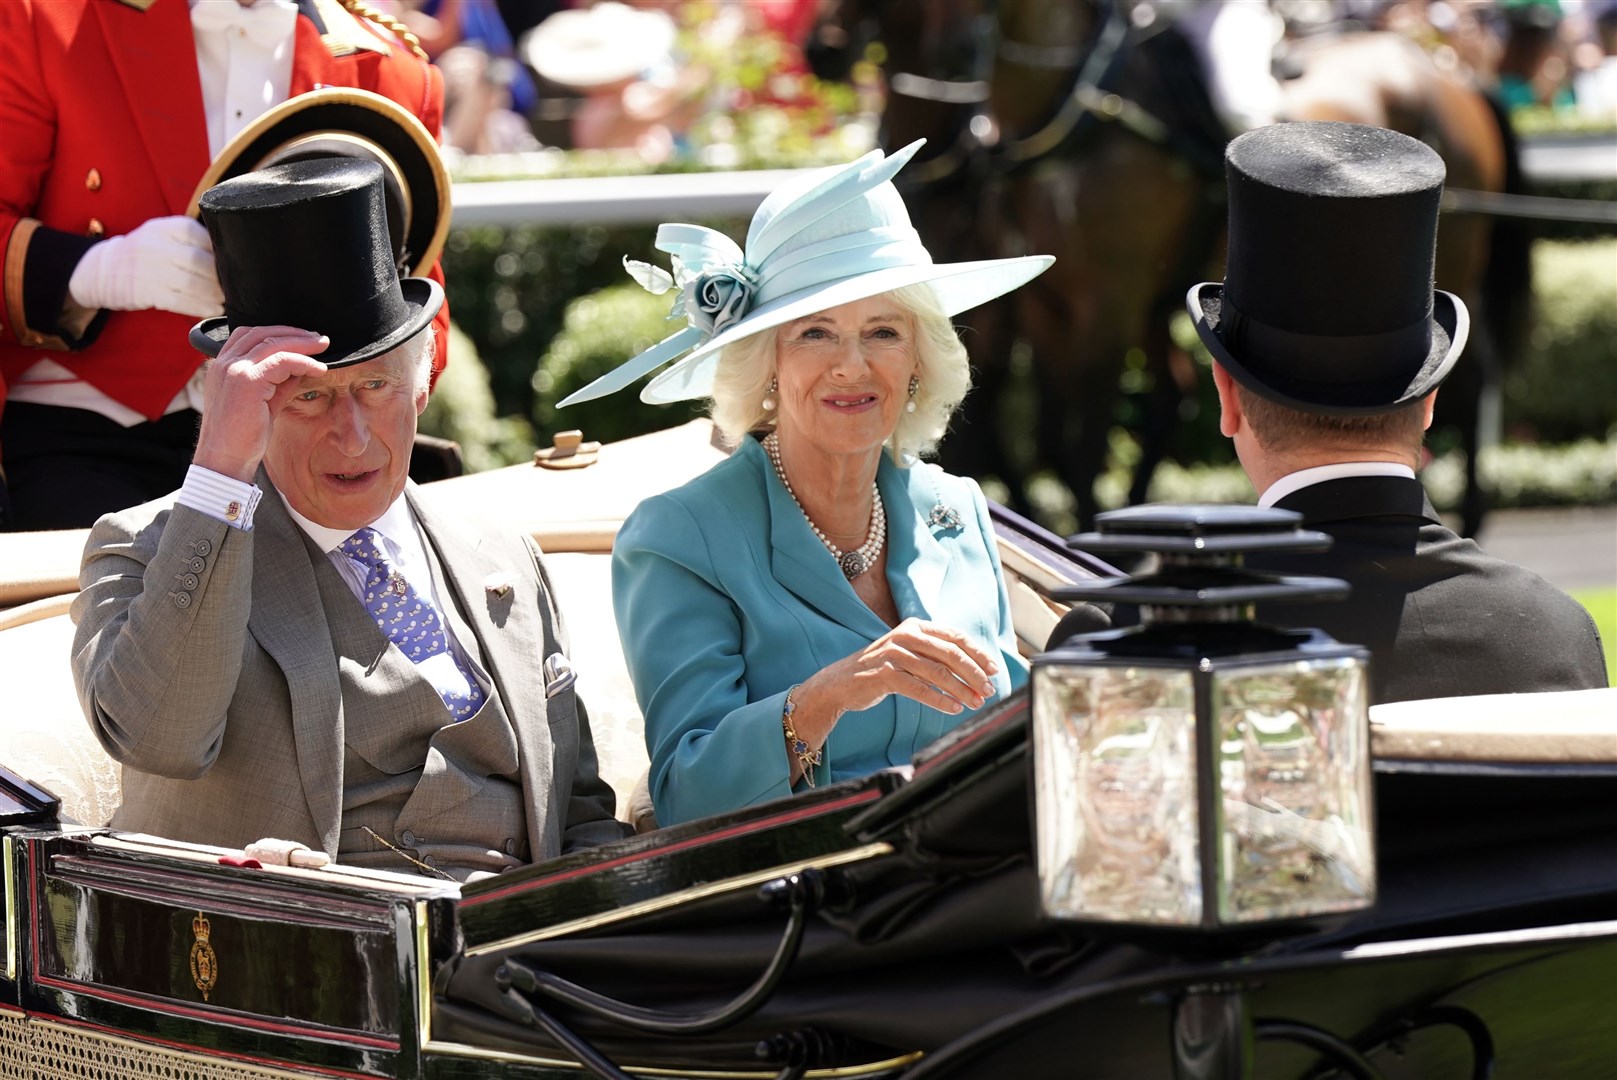 The Prince of Wales, Duchess of Cornwall and Peter Phillips arriving by carriage at Royal Ascot. Aaron Chown/PA